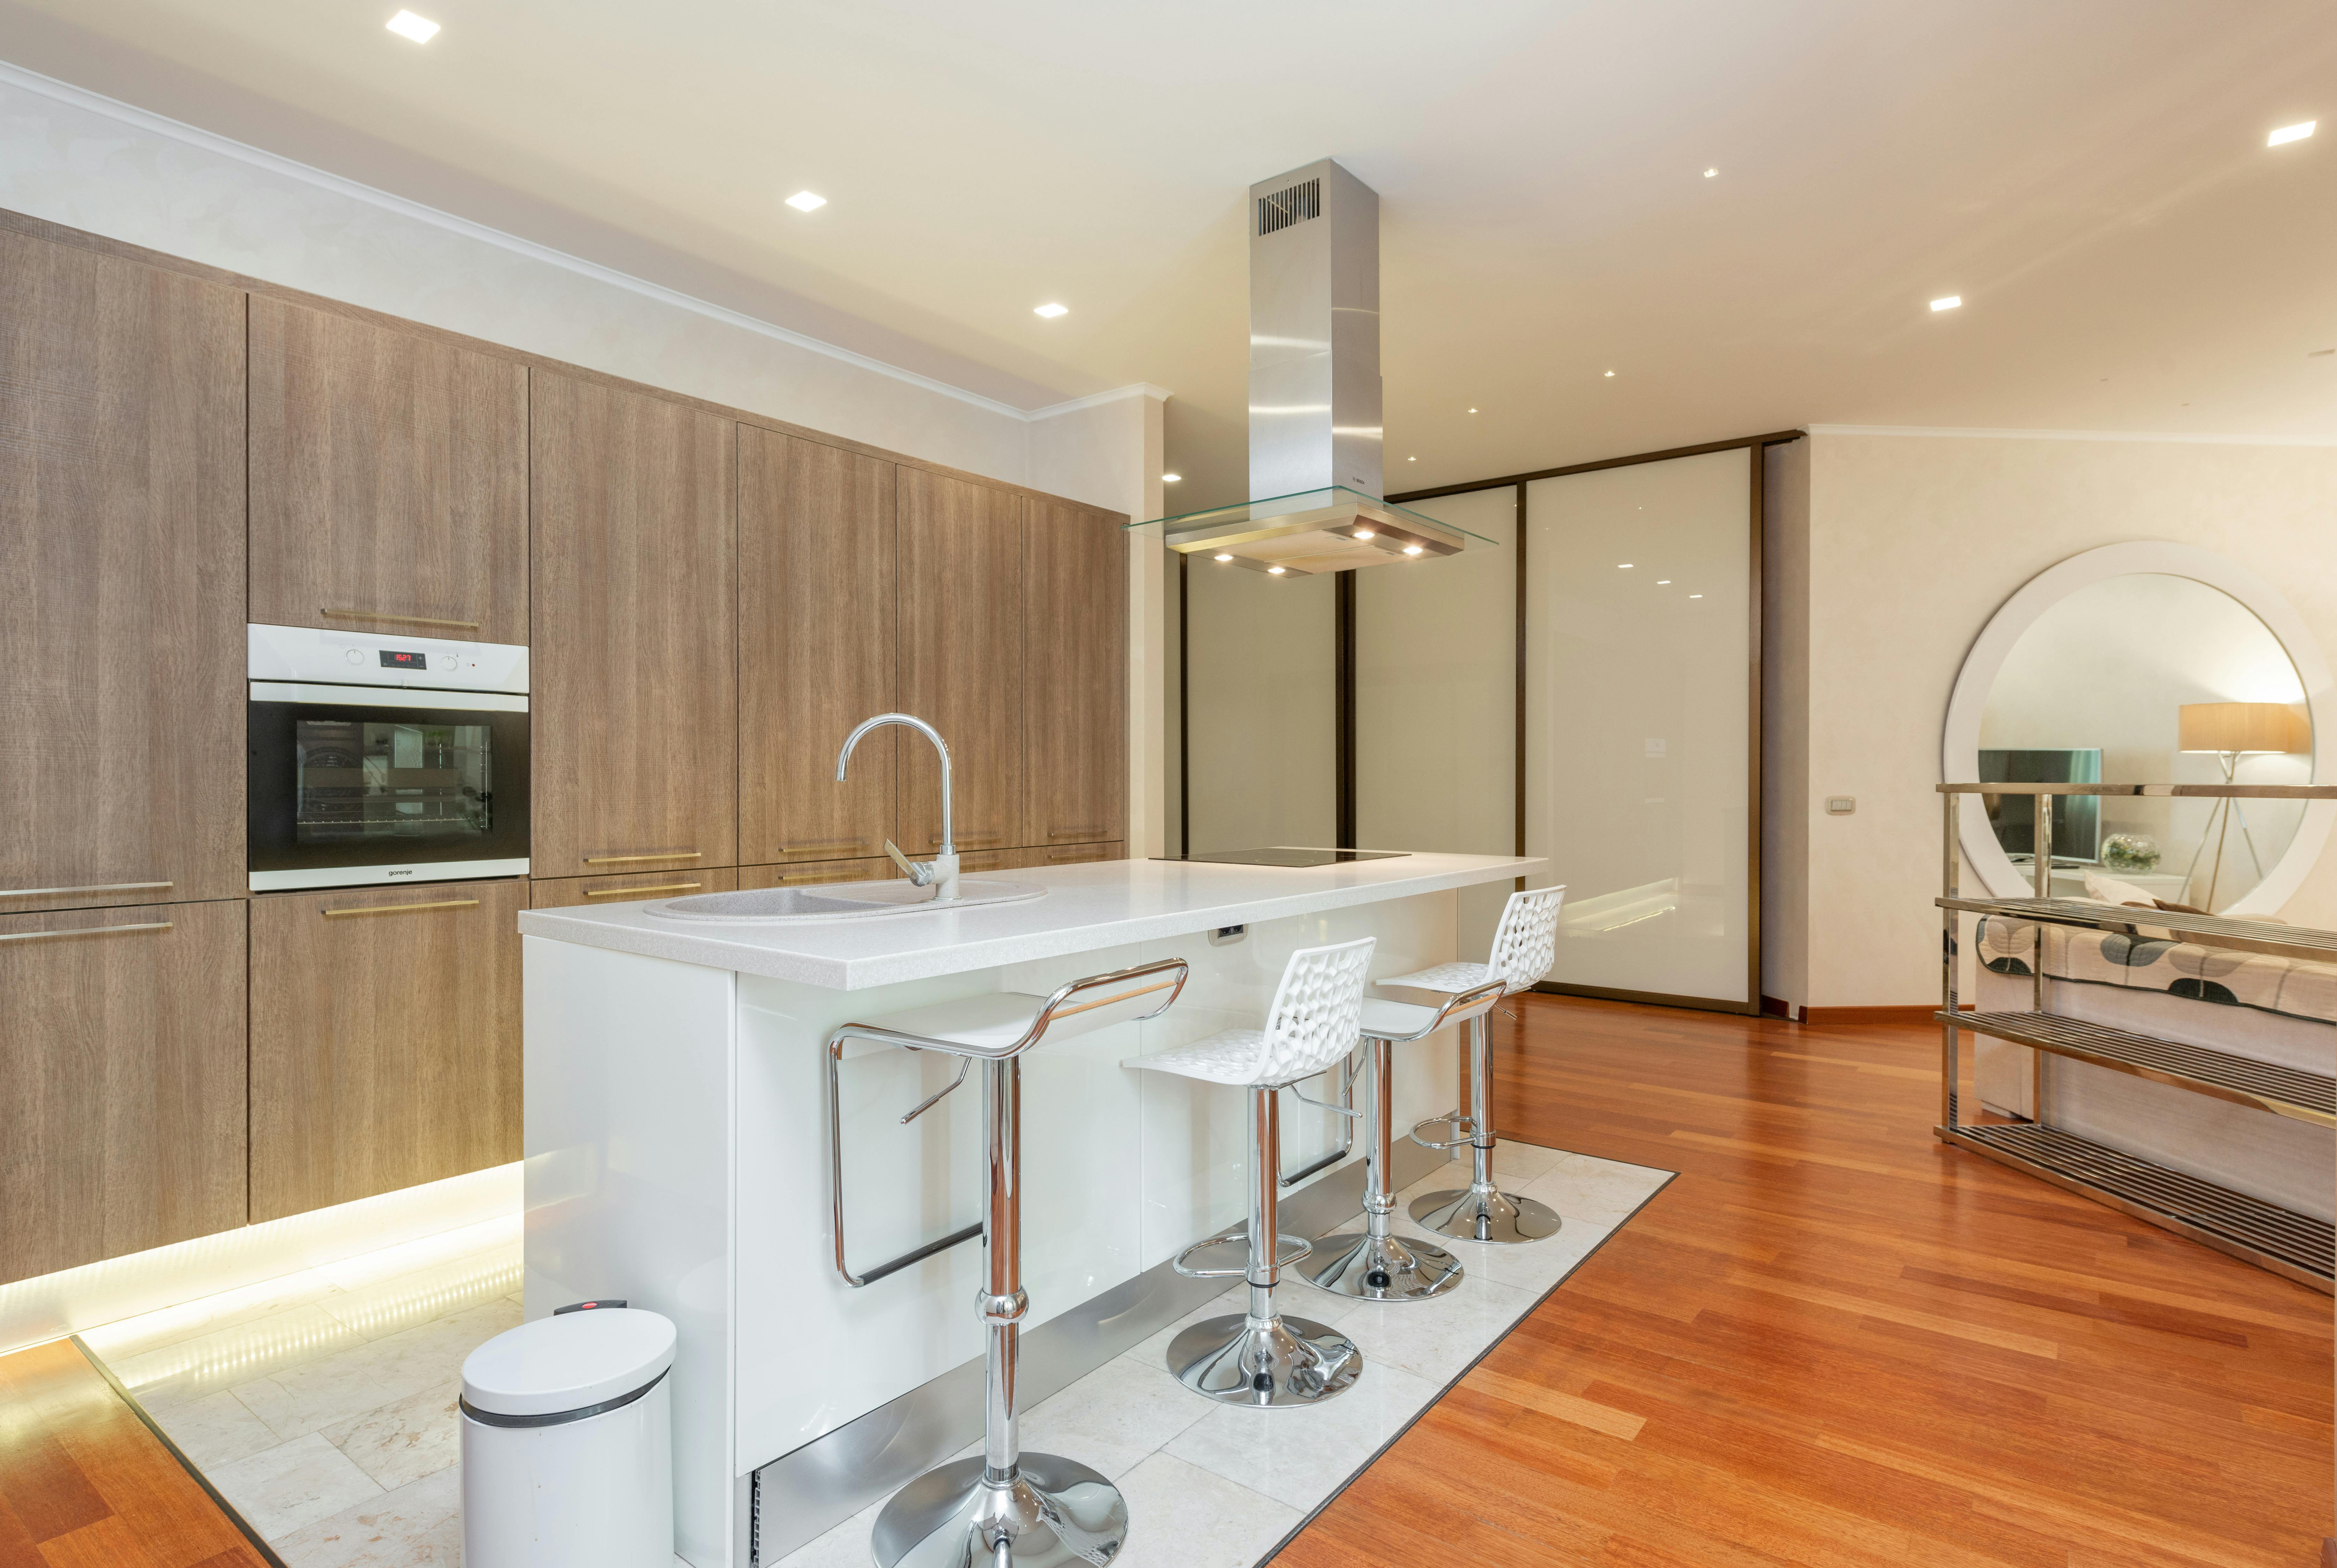 kitchen zone with minimalist furniture and modern appliances in spacious studio apartment